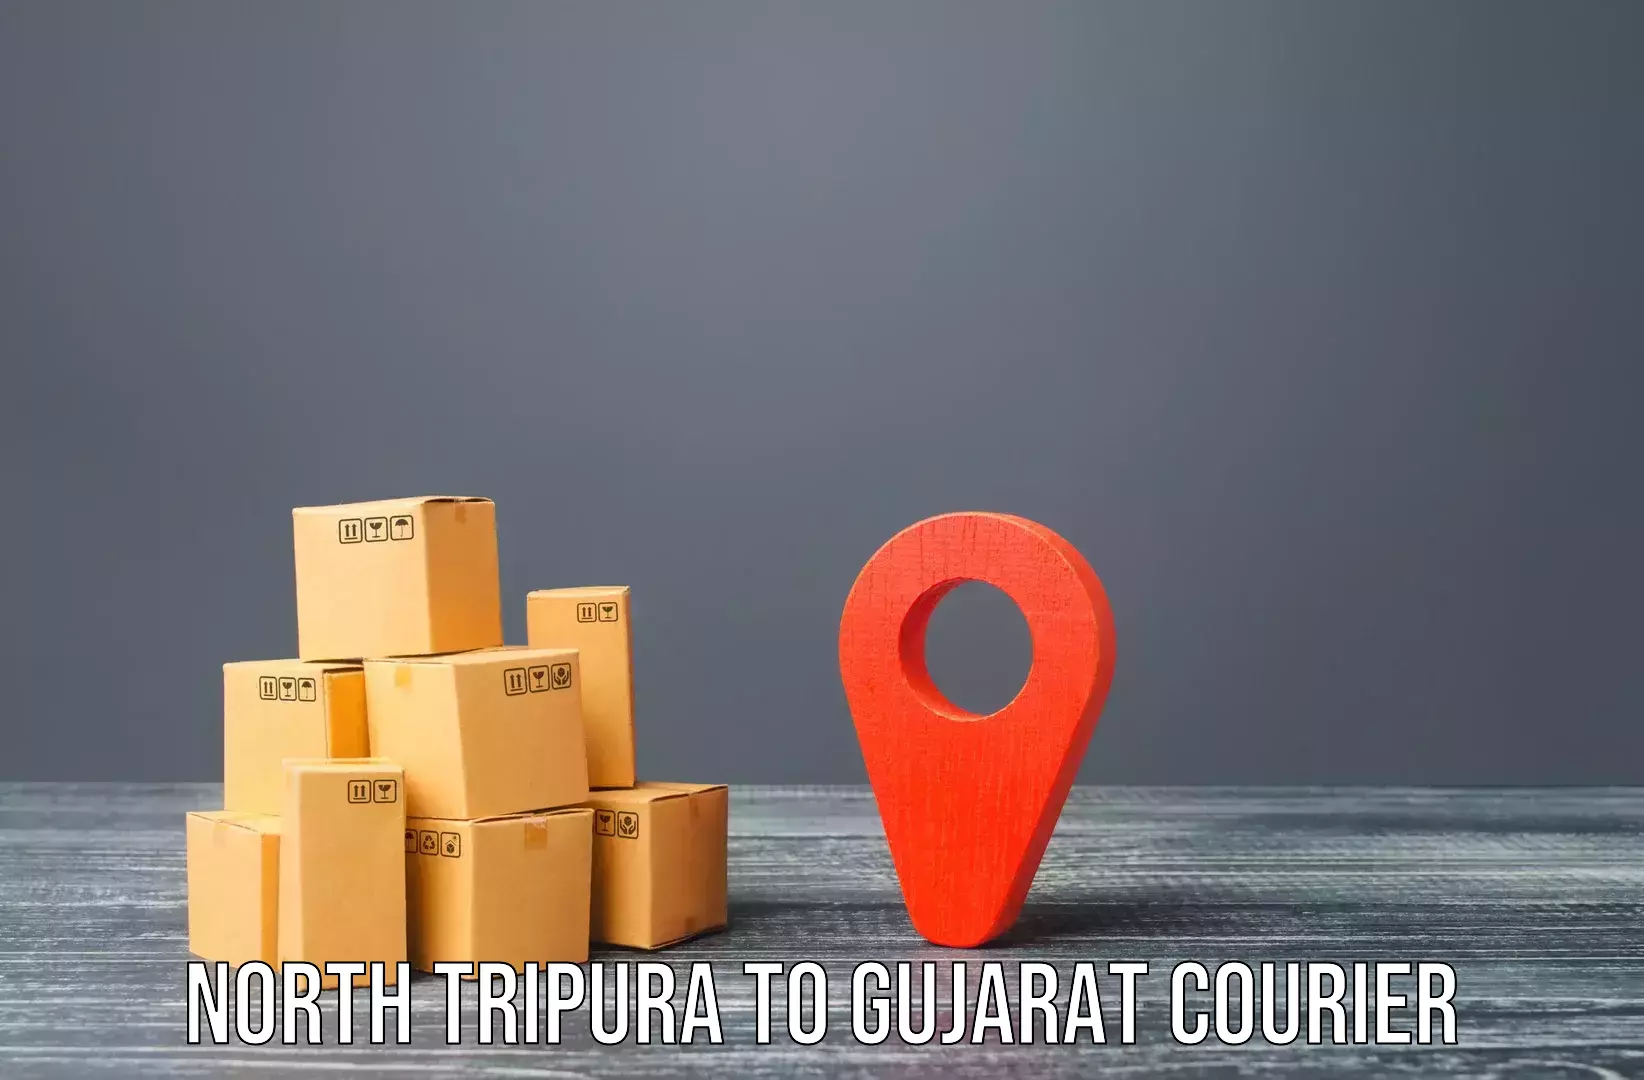 Efficient packing and moving in North Tripura to Vatadara